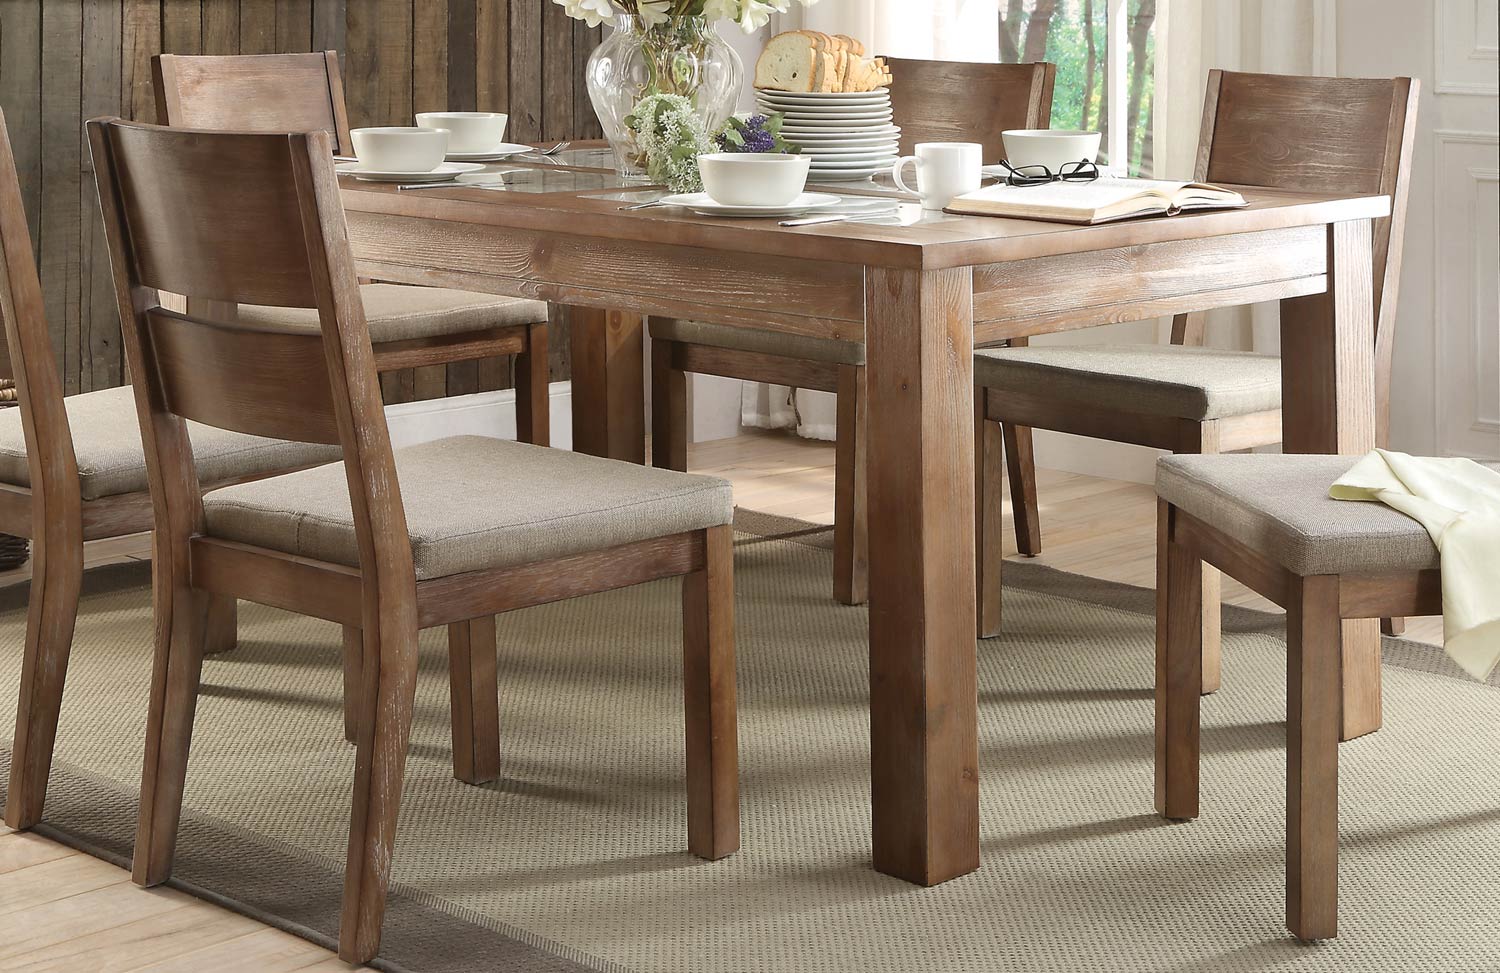 Homelegance Marion Dining Table - Tile Inset - Natural Weathered